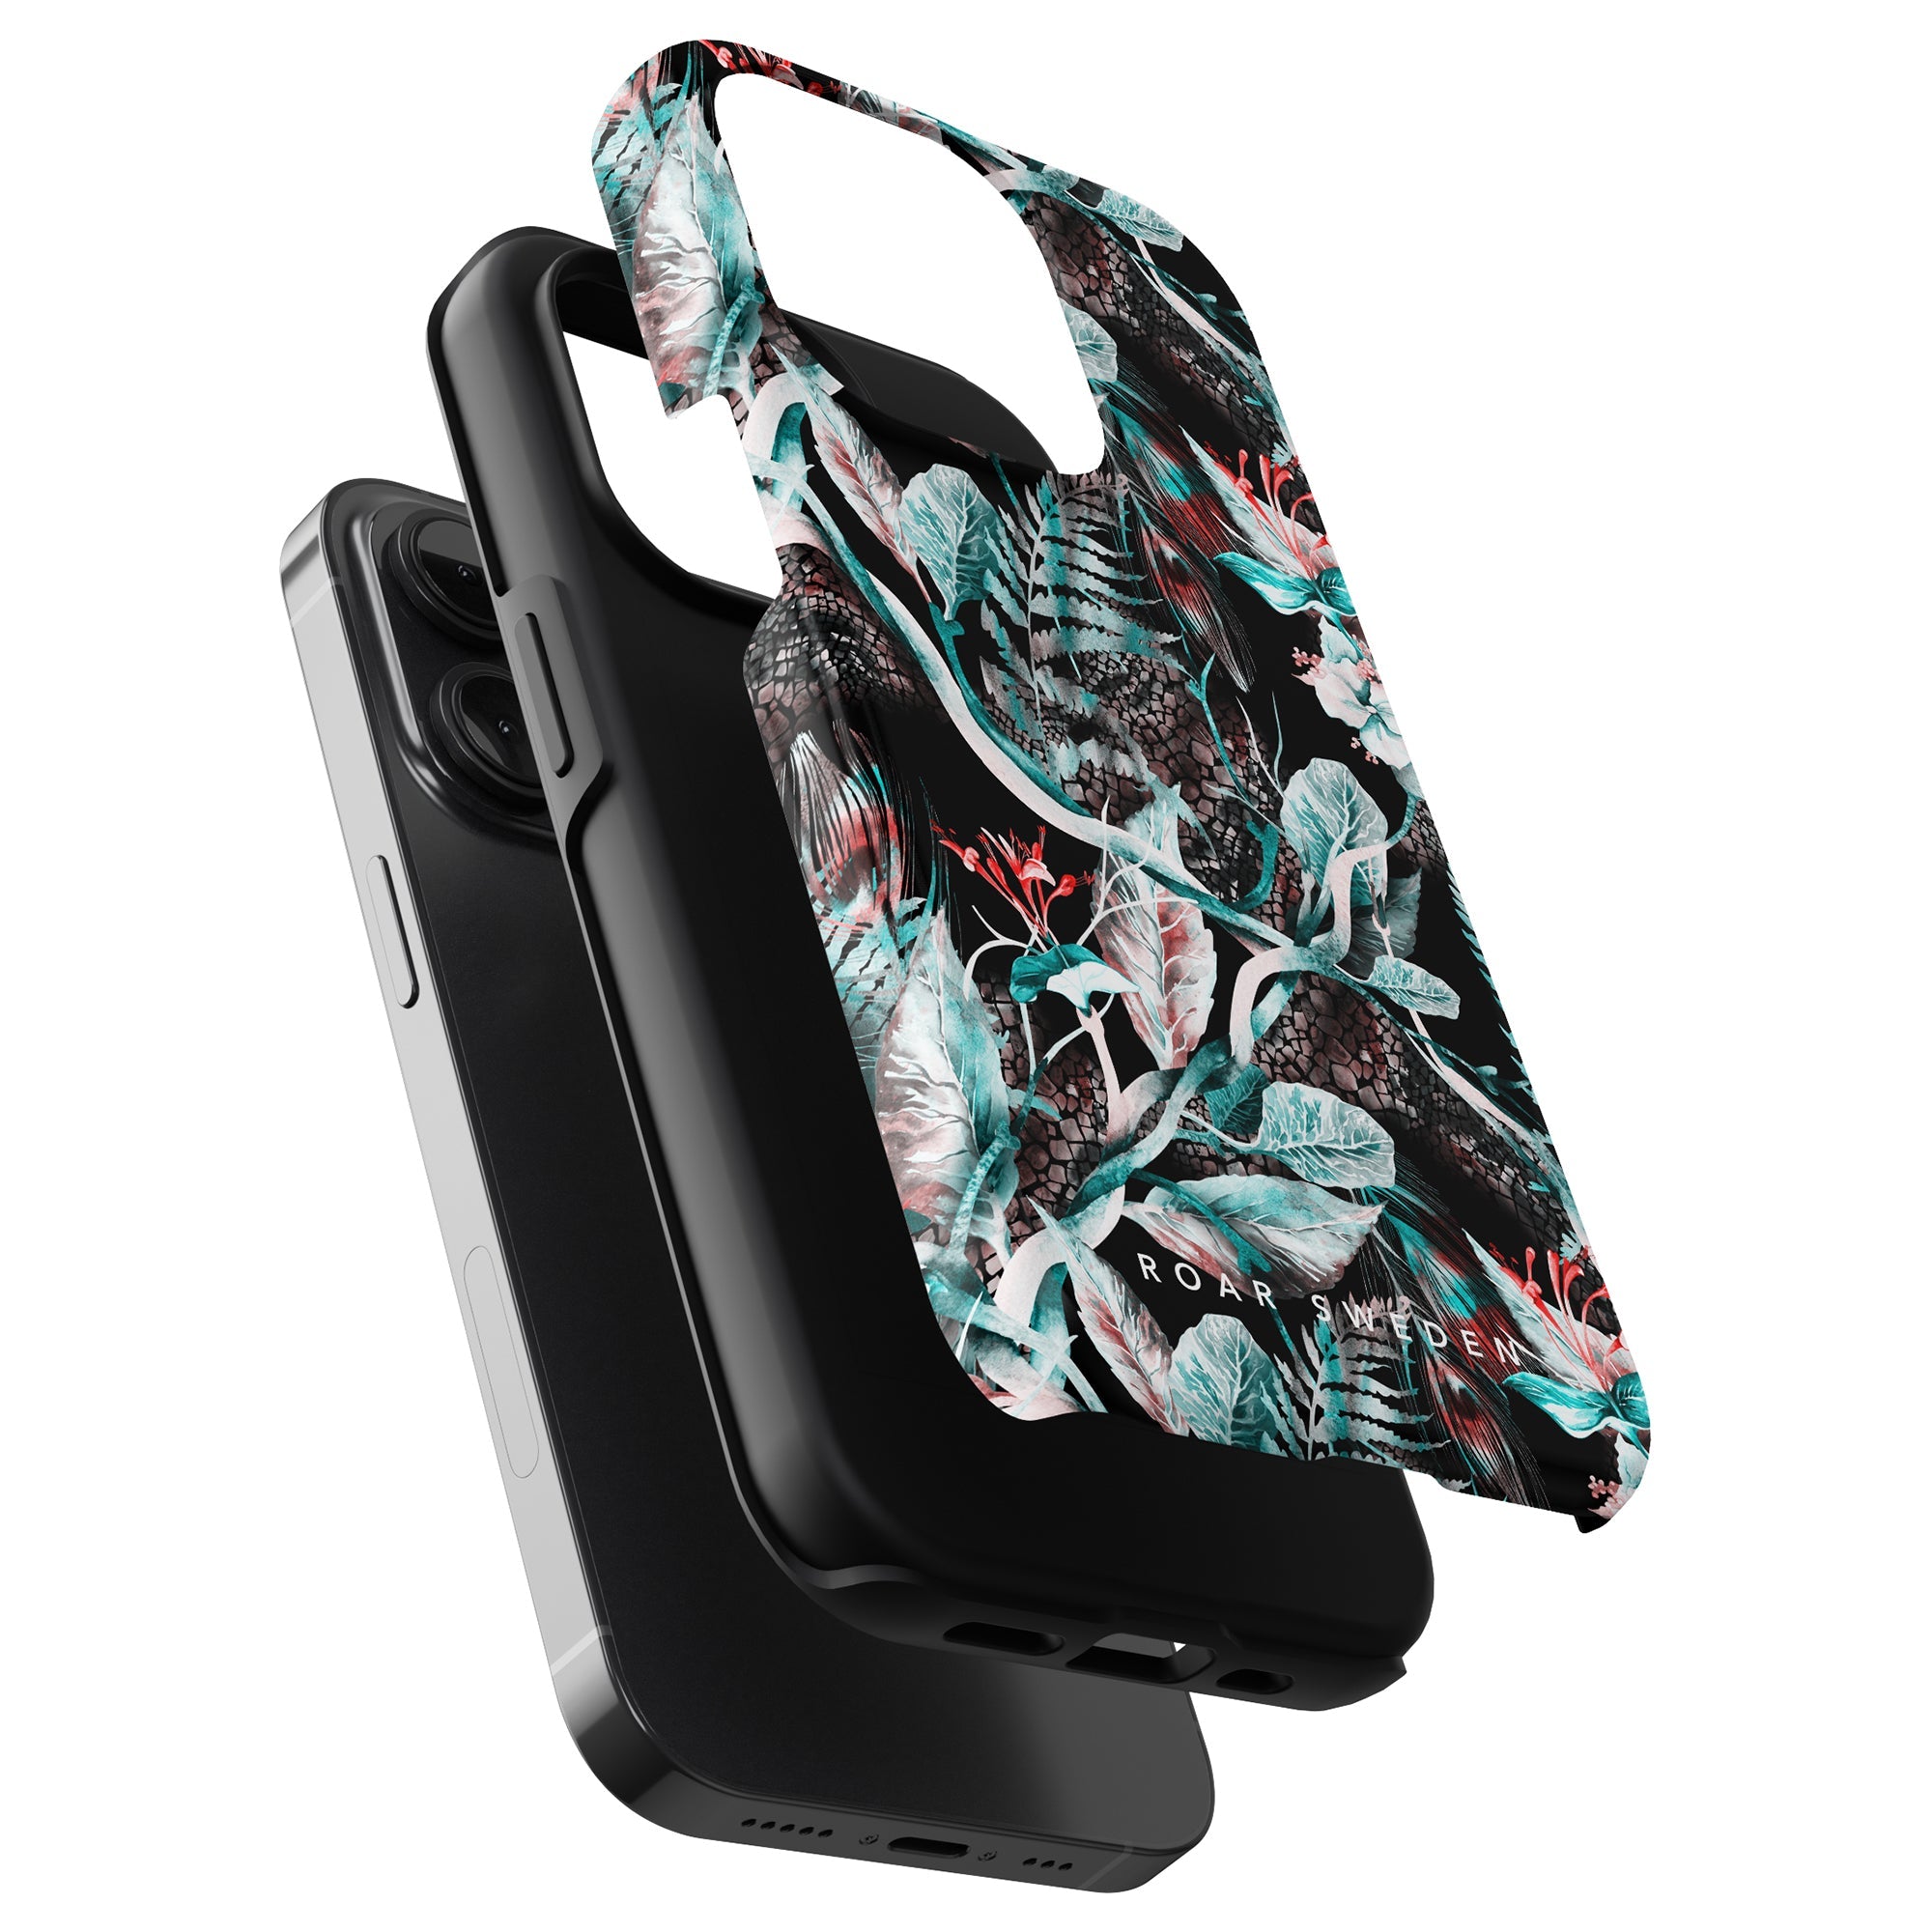 A Snake Jungle - Tough case-inspired floral patterned iPhone 11 Pro case.